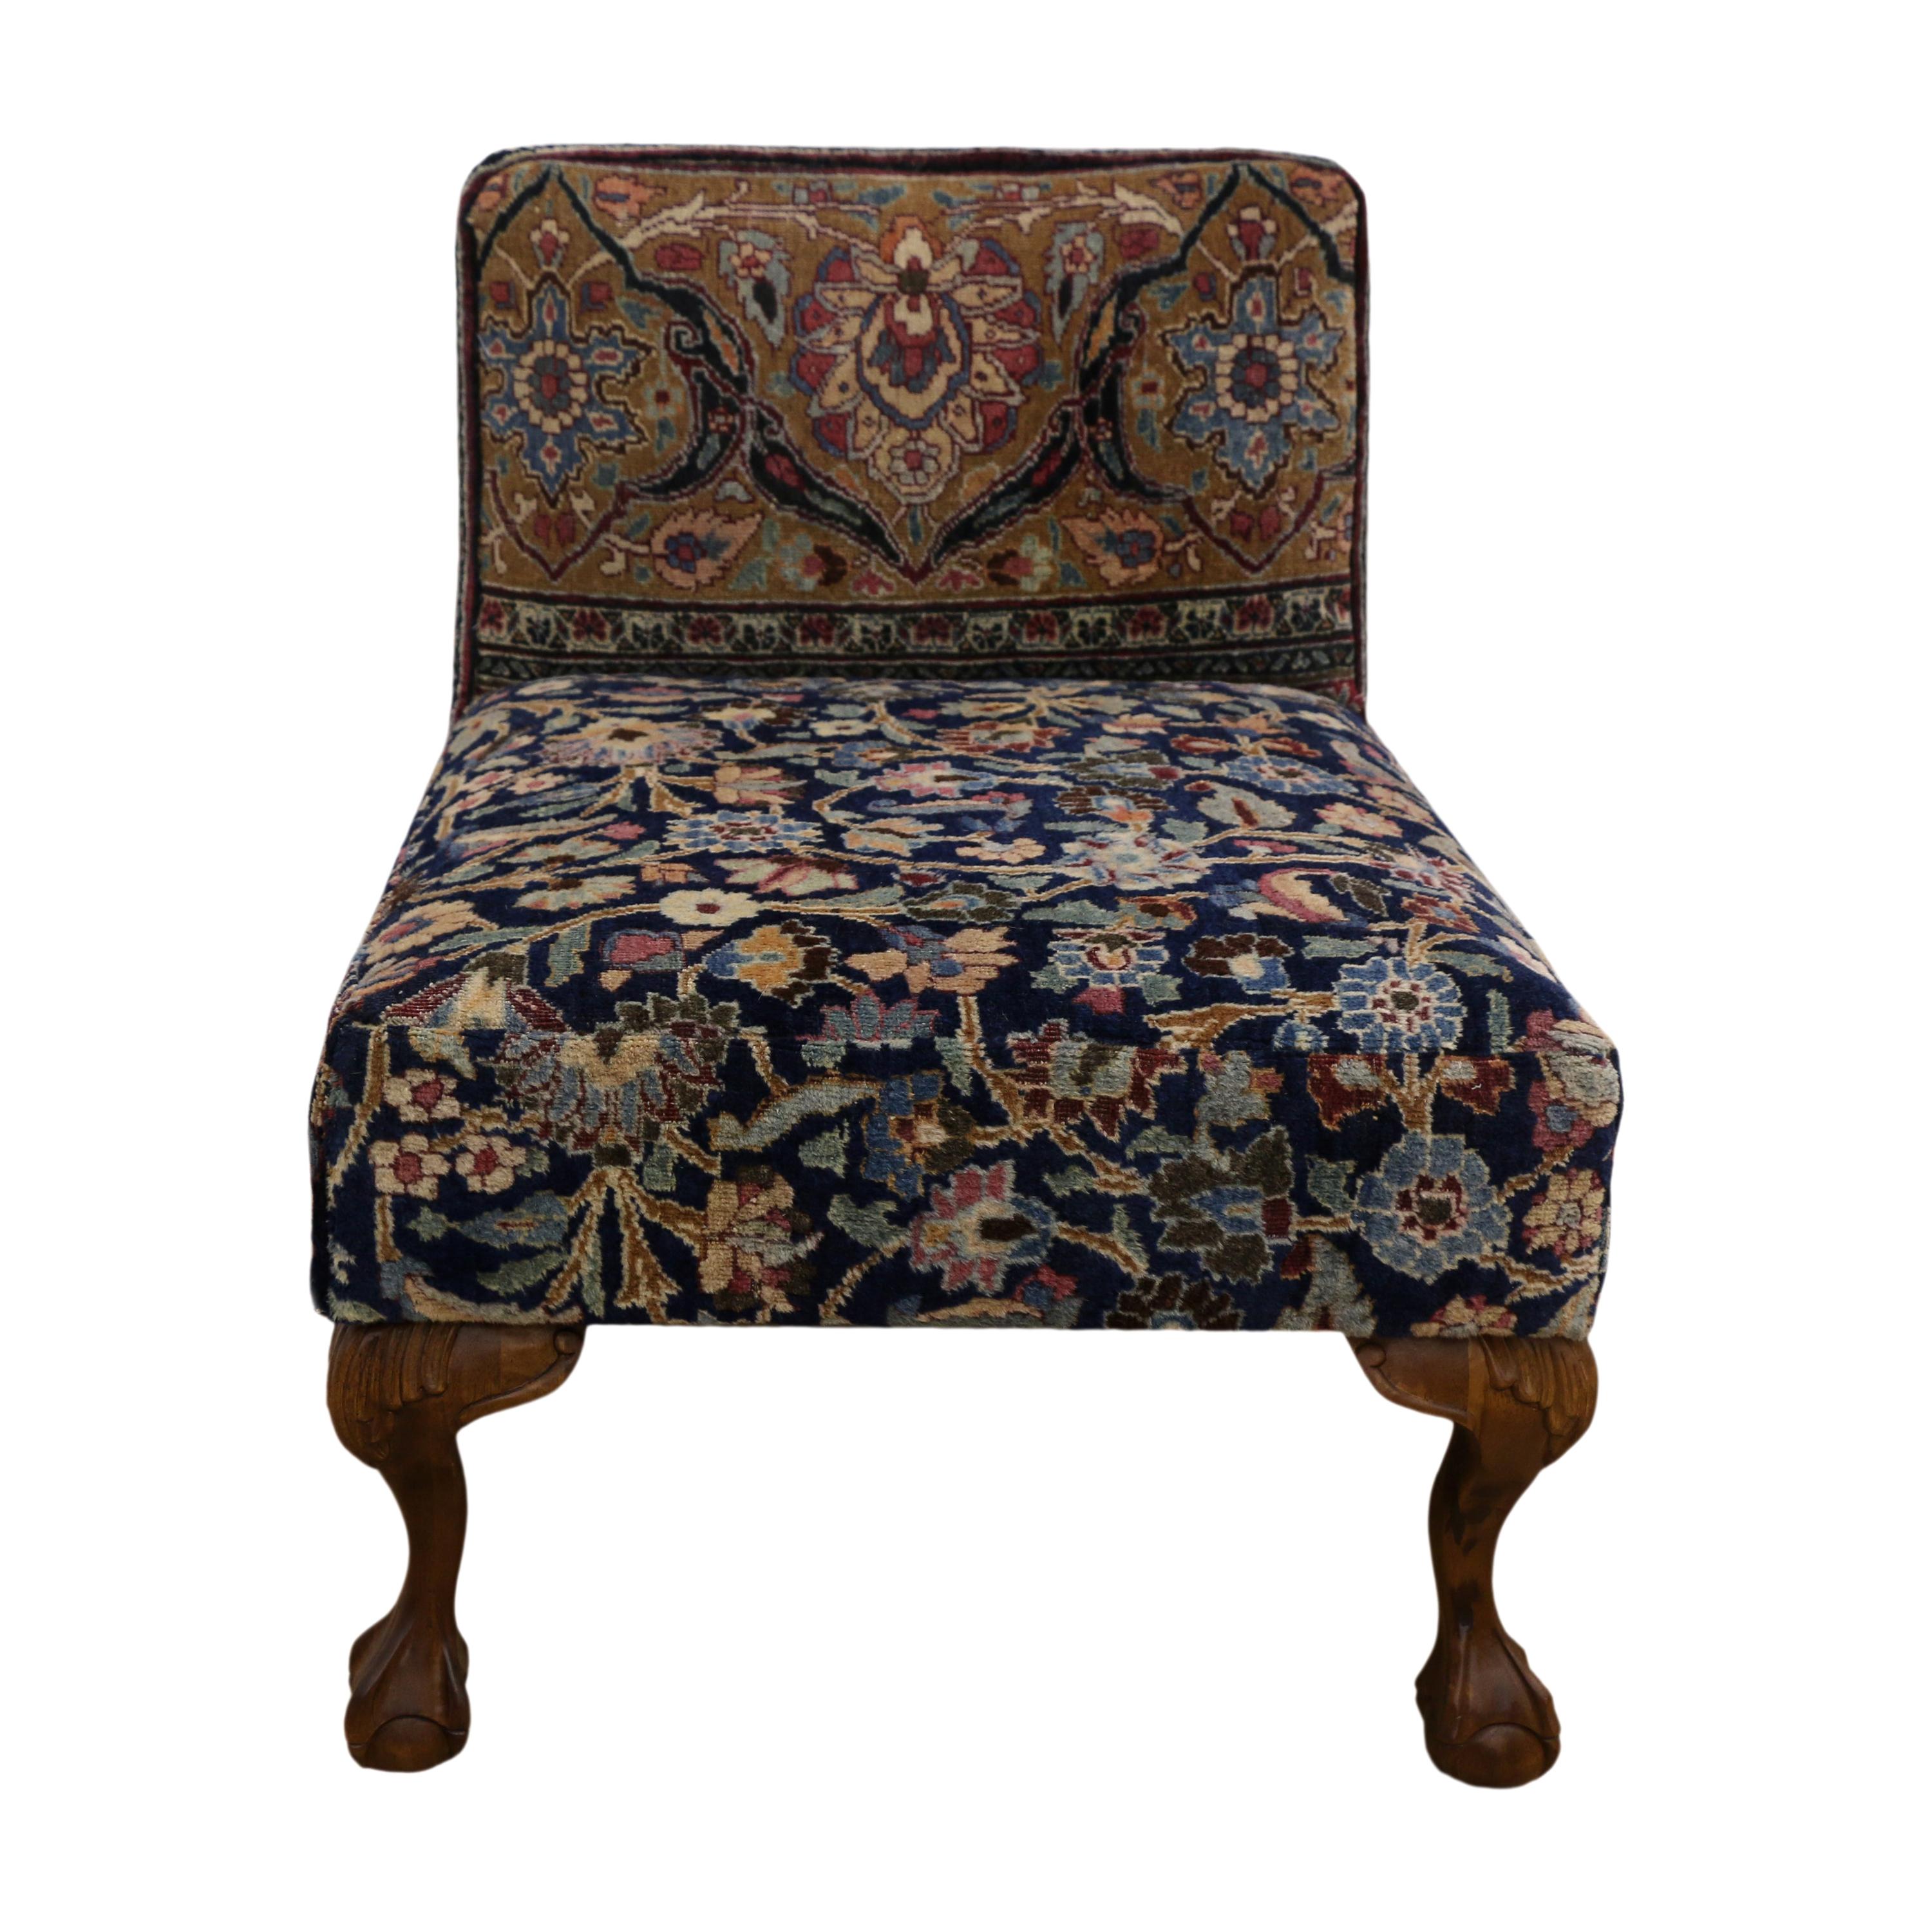 Slipper Chair with Claw Feet from Antique Persian Khorassan Rug